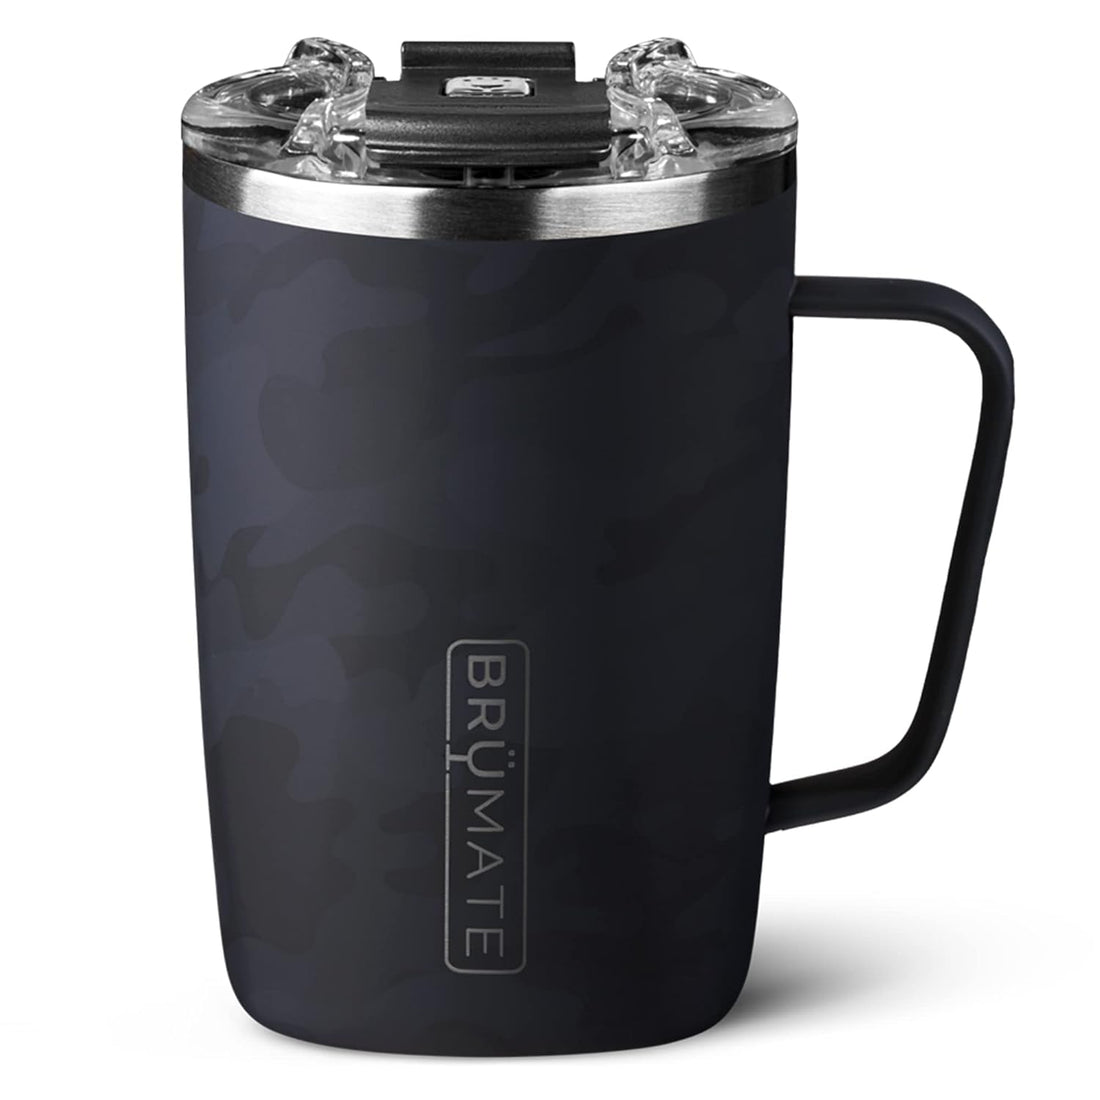 BrüMate Toddy - 16oz 100% Leak Proof Insulated Coffee Mug with Handle & Lid - Stainless Steel Coffee Travel Mug - Double Walled Coffee Cup (Midnight Camo)